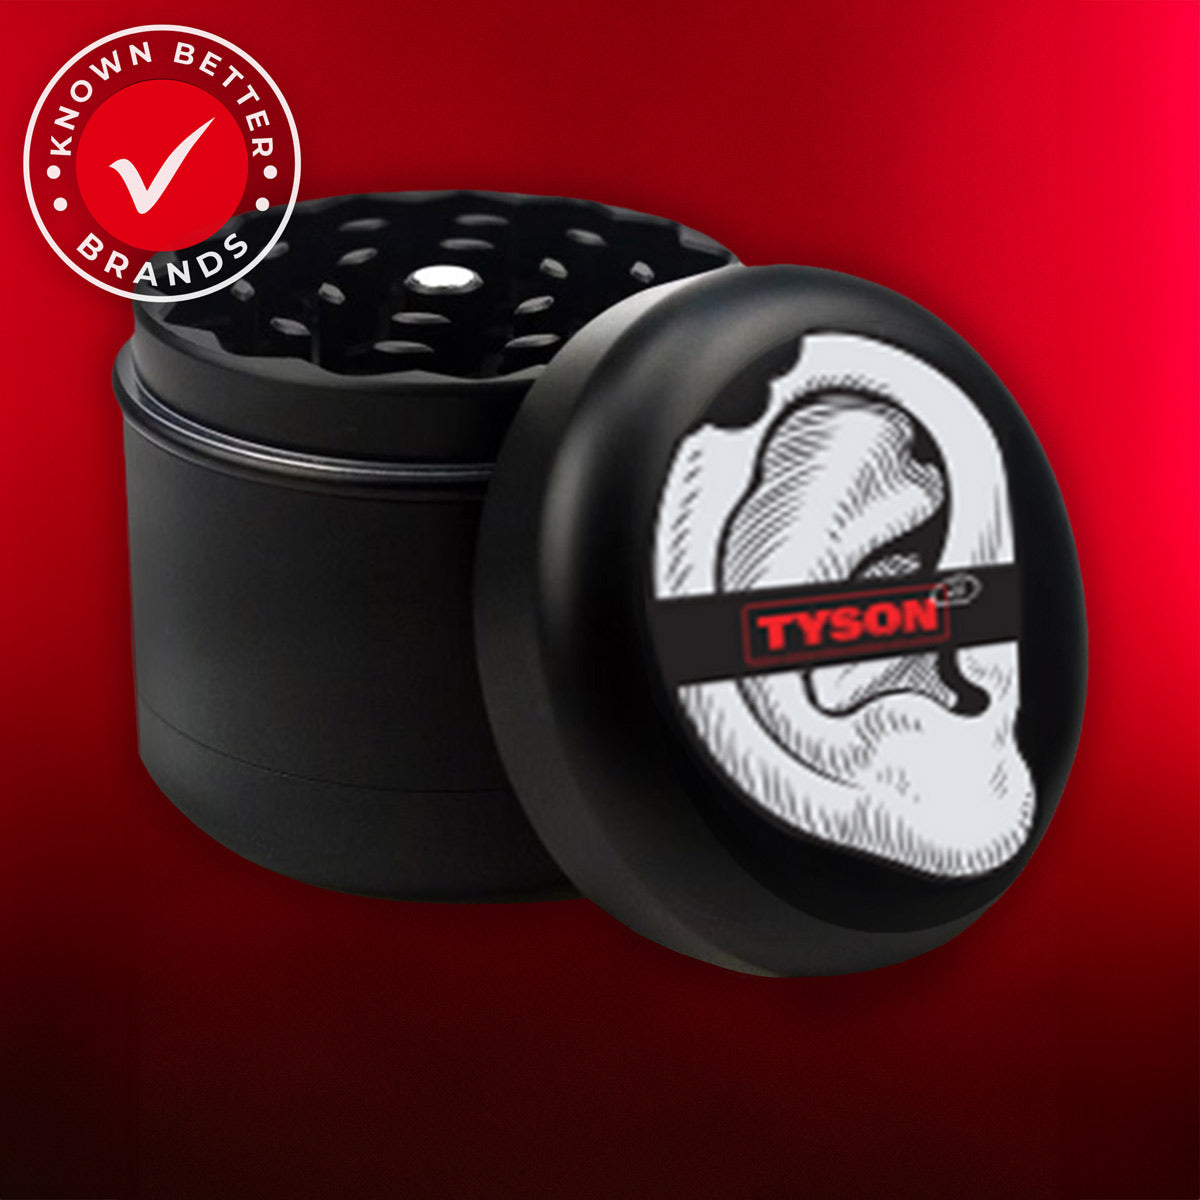 TYSON 2.0 Bitten Ear Grinder - Black grinder featuring a ear with a chunk missing design, a playful no when mike tyson bit holyfield's ear in 1997. 4 piece weed grinder